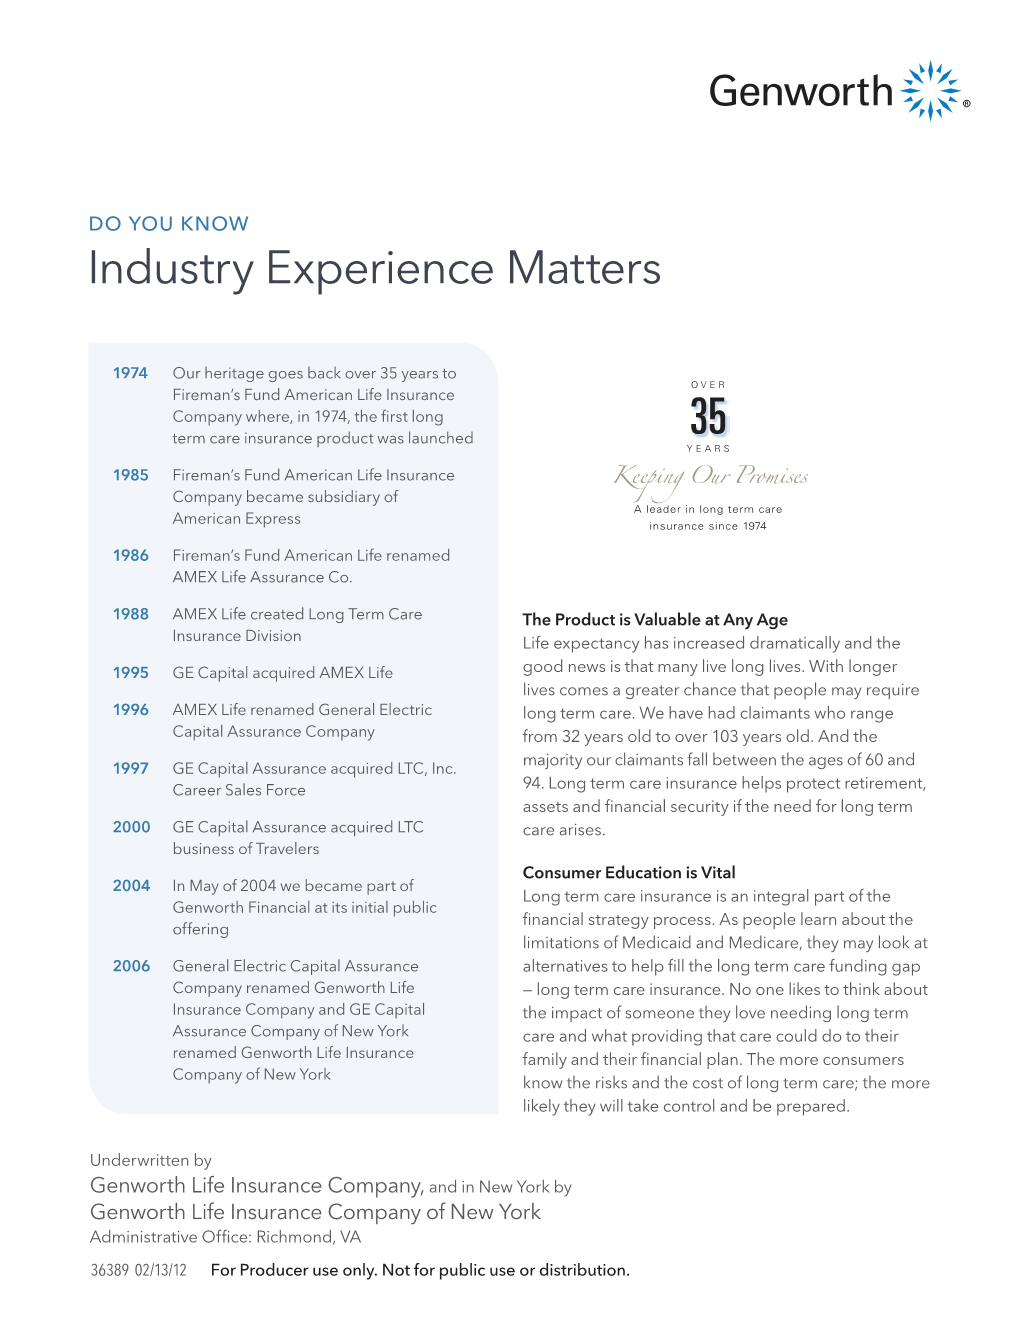 Industry Experience Matters